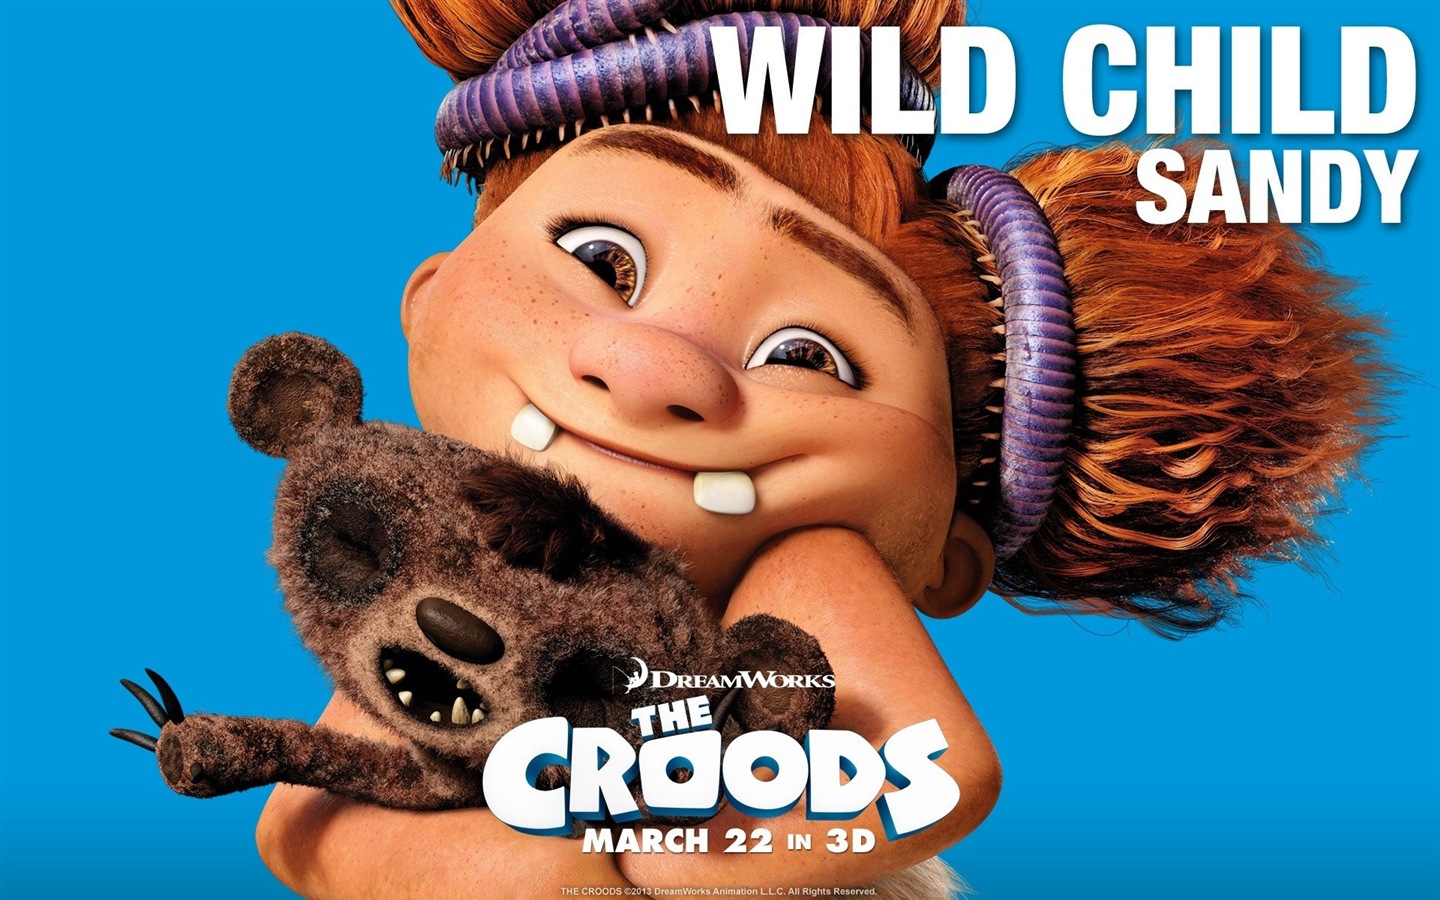 The Croods HD movie wallpapers #9 - 1440x900